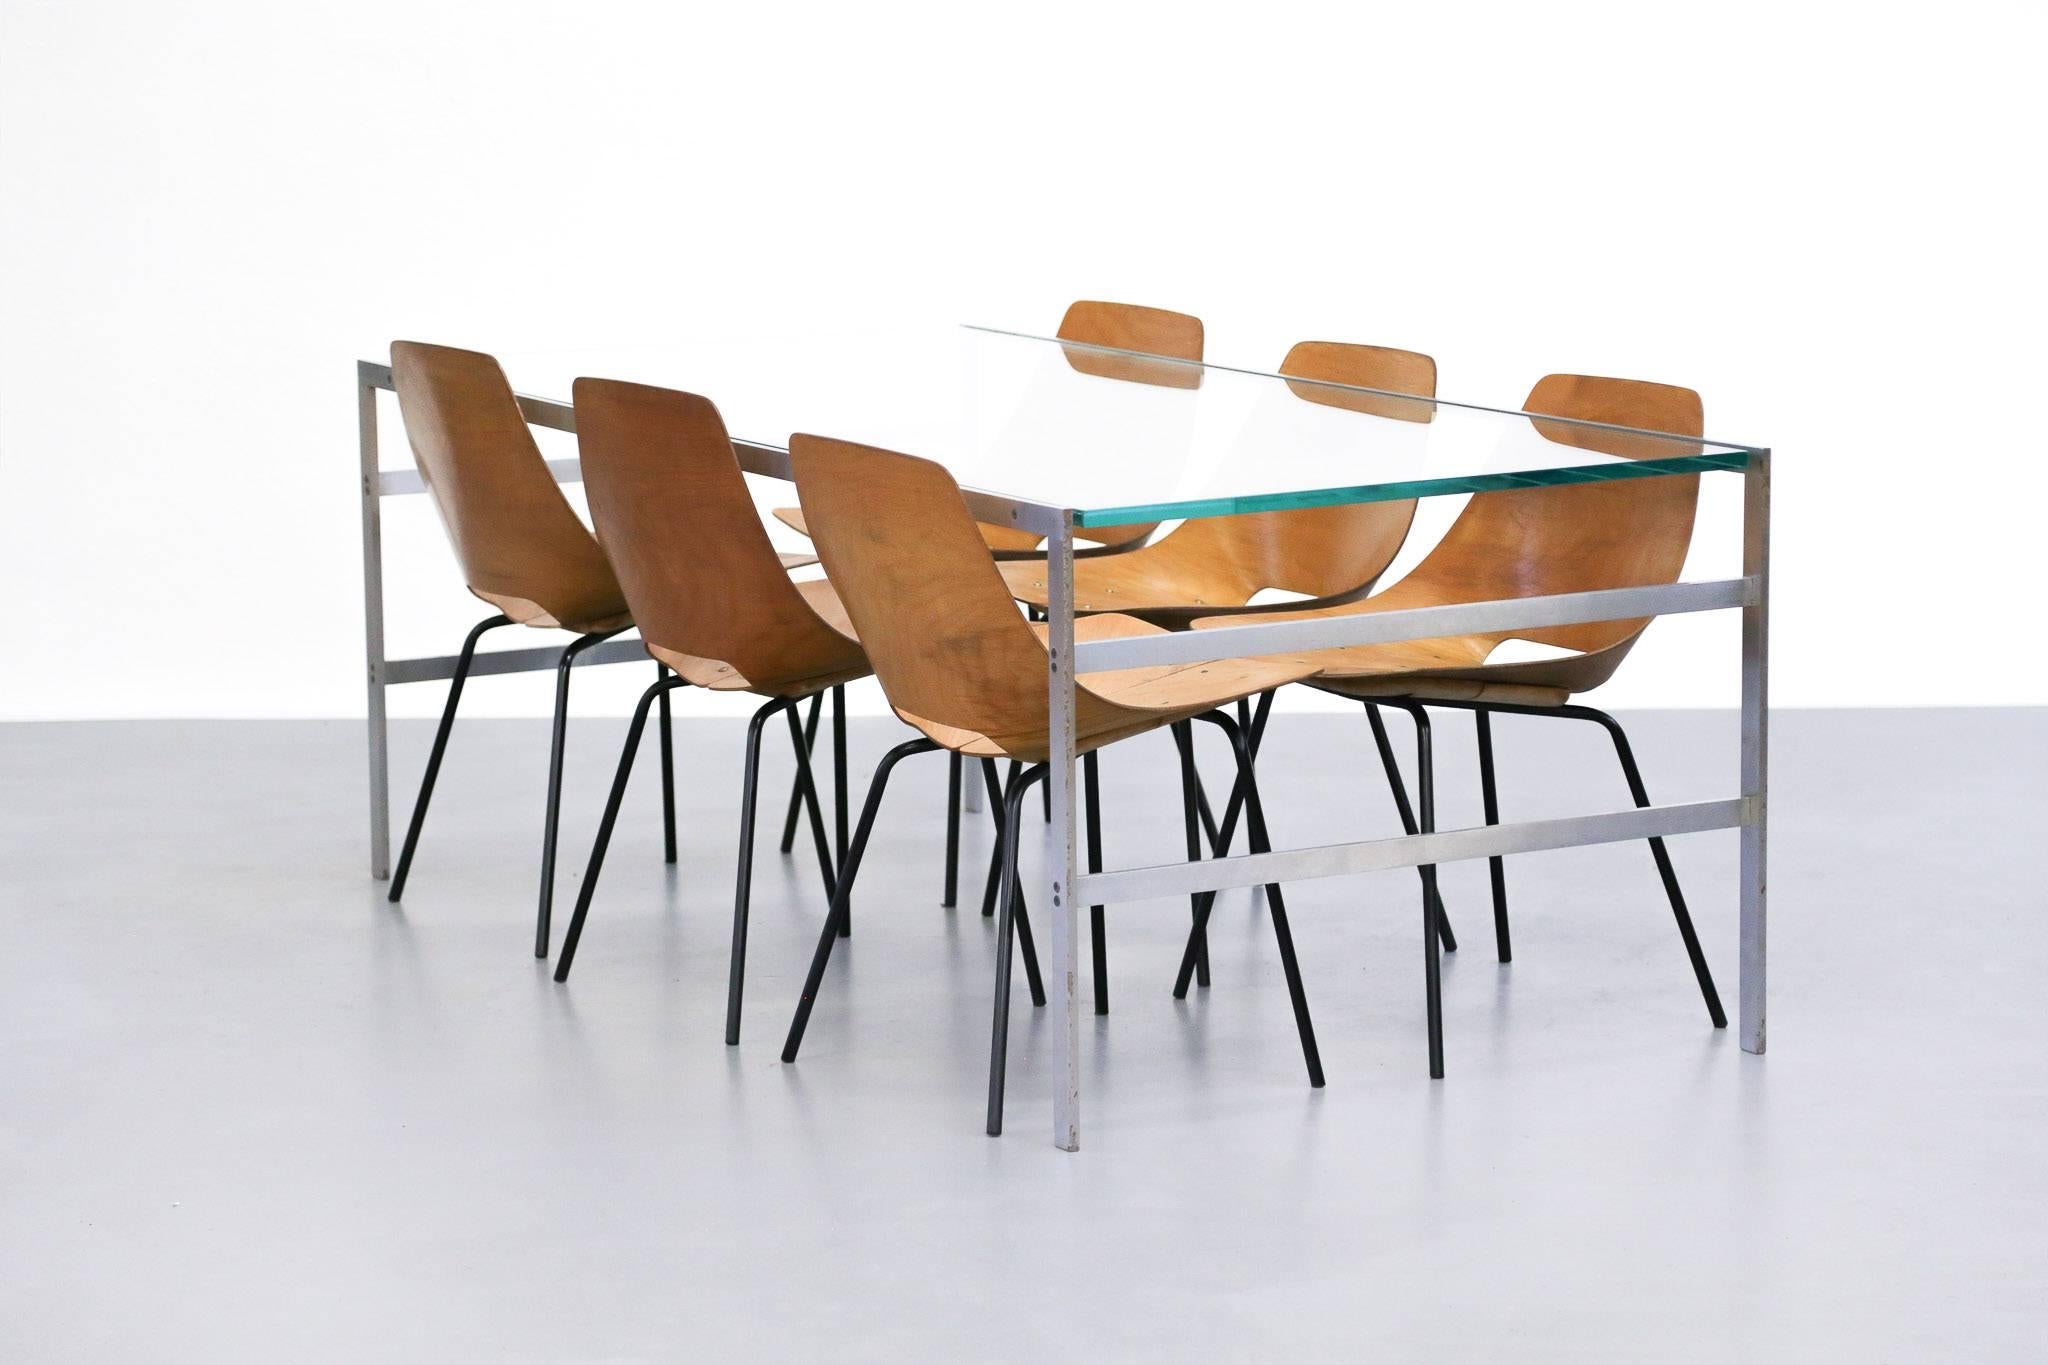 Rare dining table designed by Preben Fabricius and Jorgen Kastholm for Bo-Ex.
Base made of steel with a top glass.